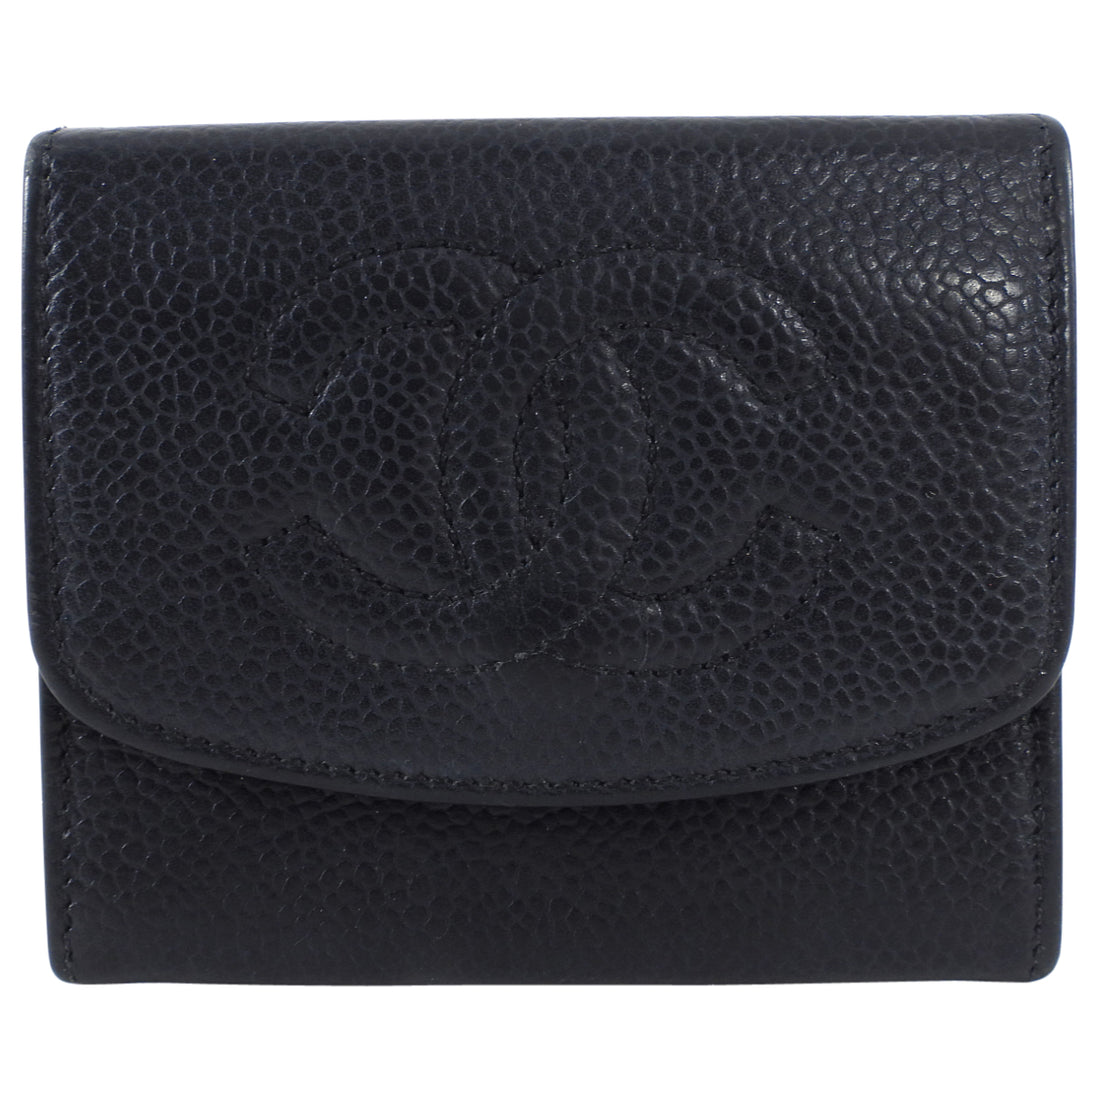 Chanel Vintage 1991 Caviar Timeless Coin Pouch Wallet